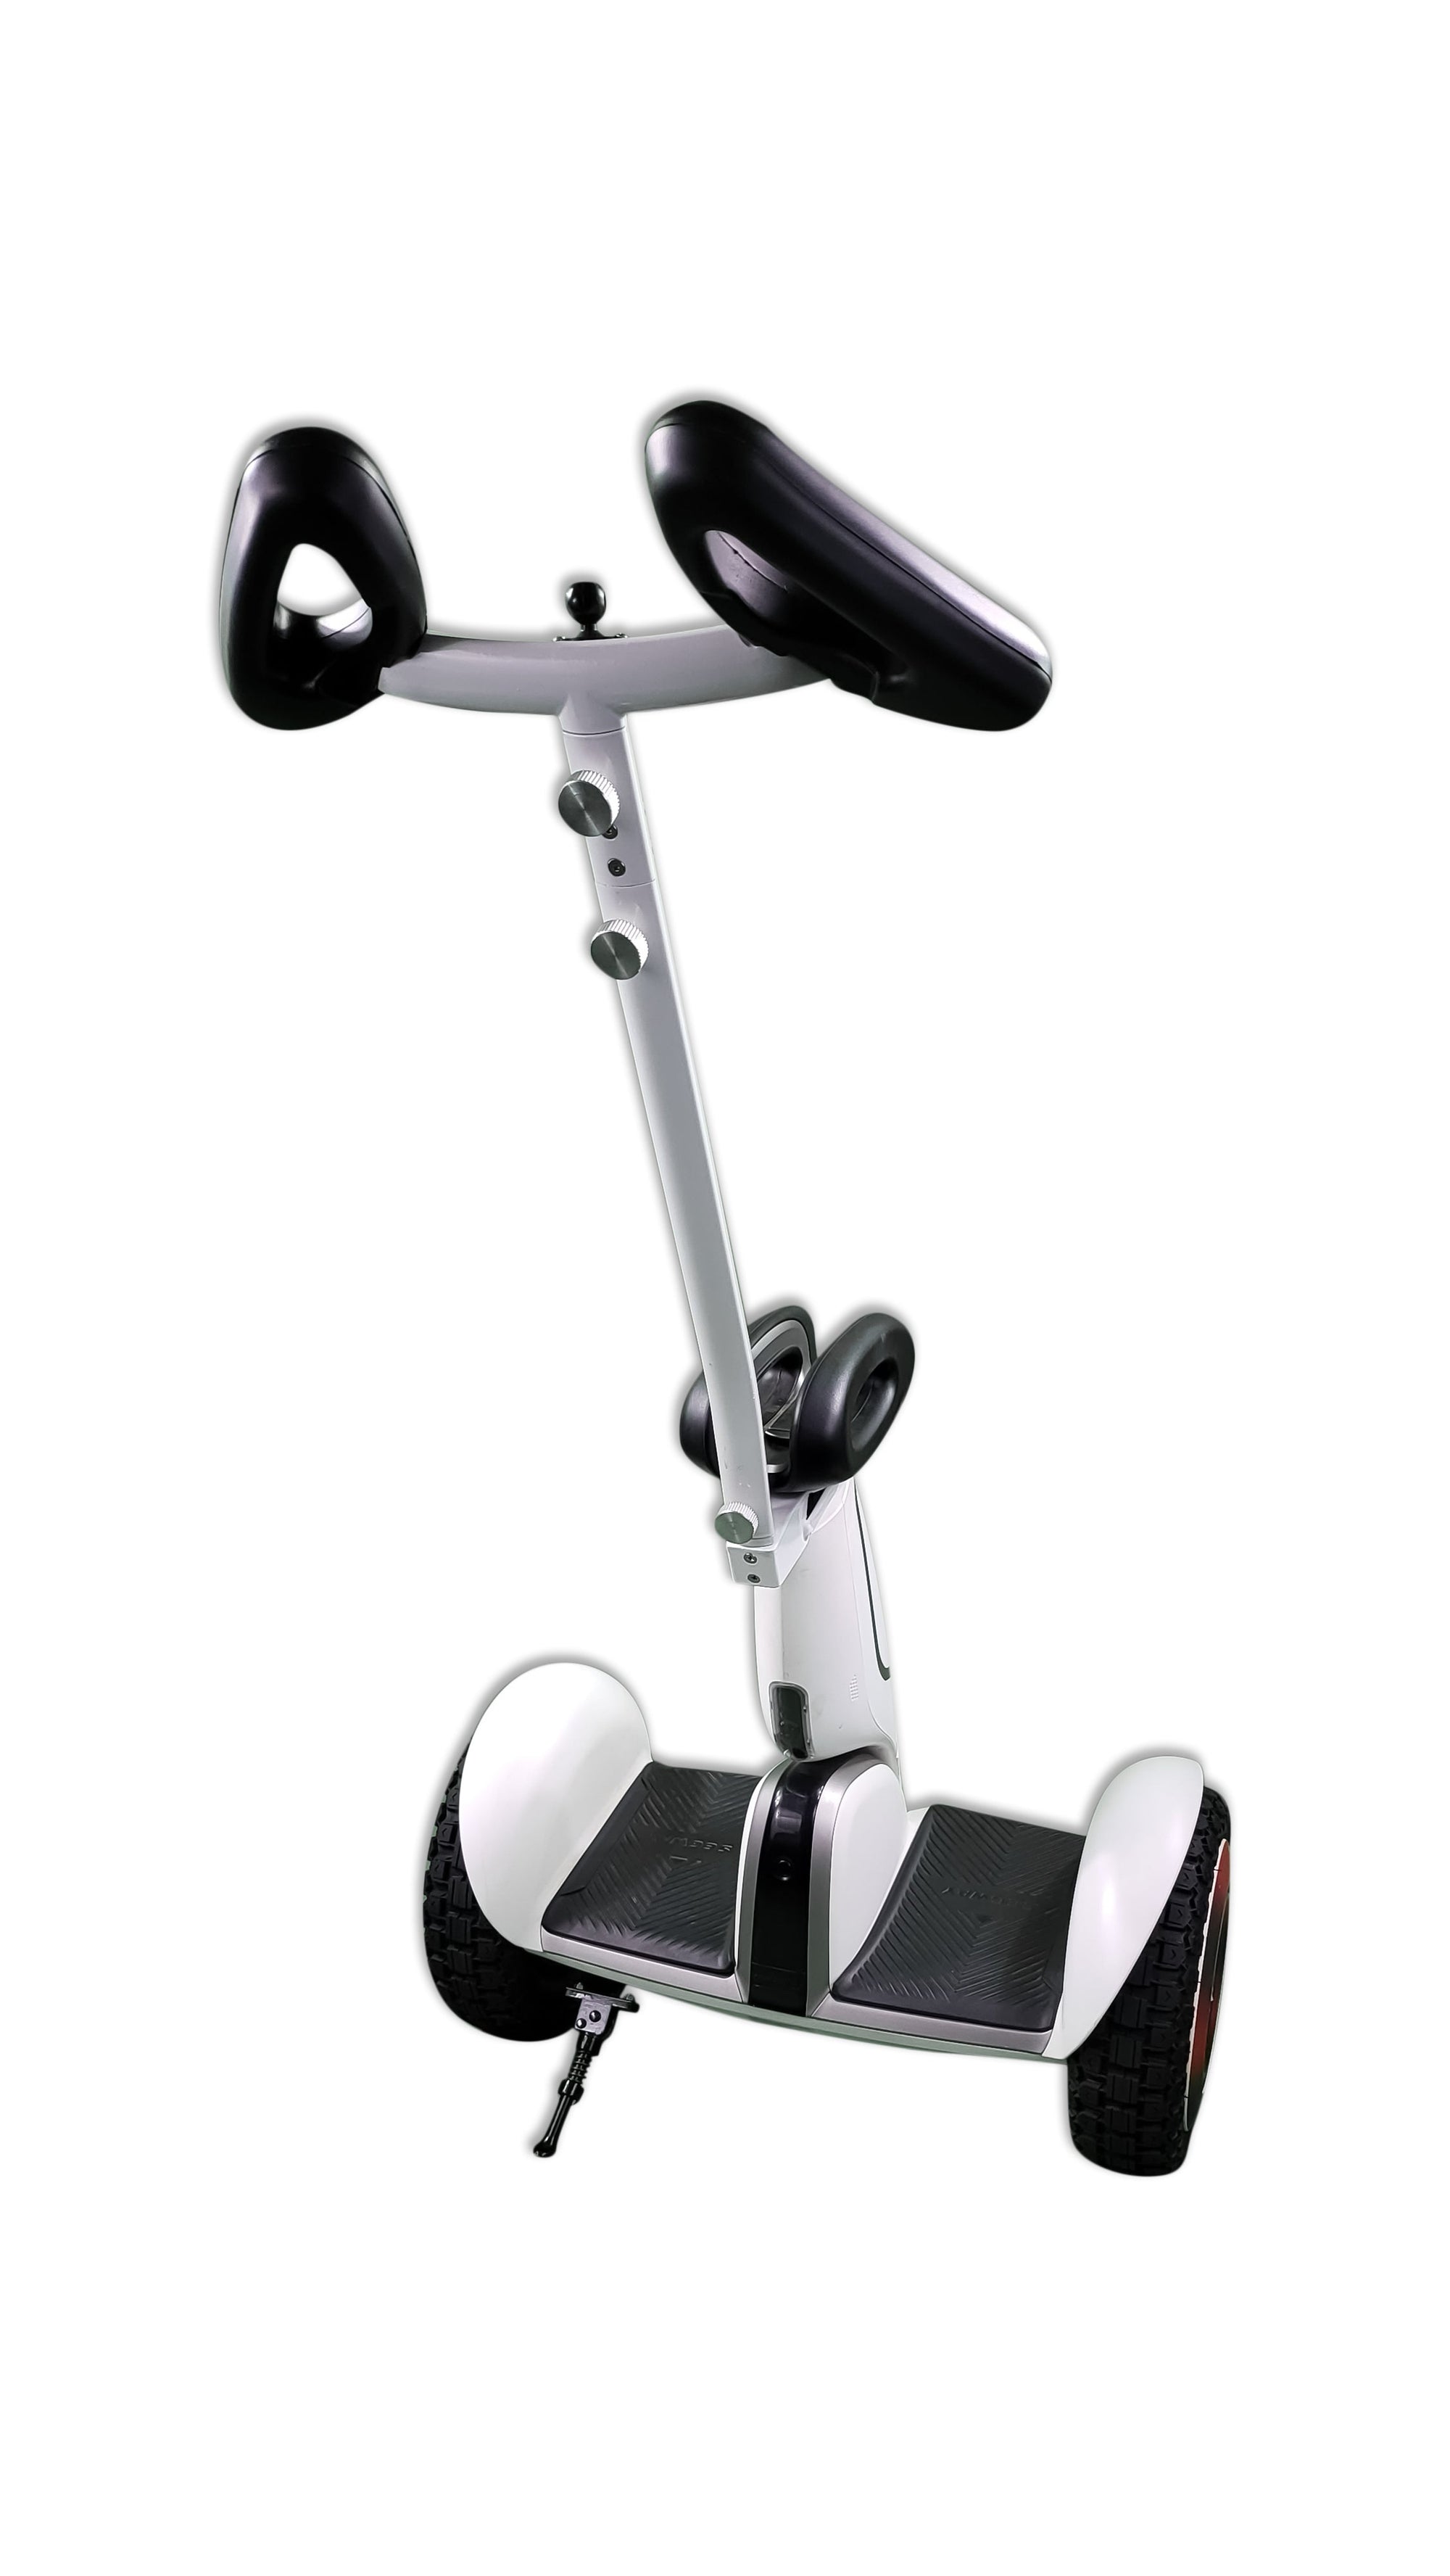 Accessories For Segway - Height Adjustable Handlebar For Segway MiniPLUS And Ninebot S-PLUS